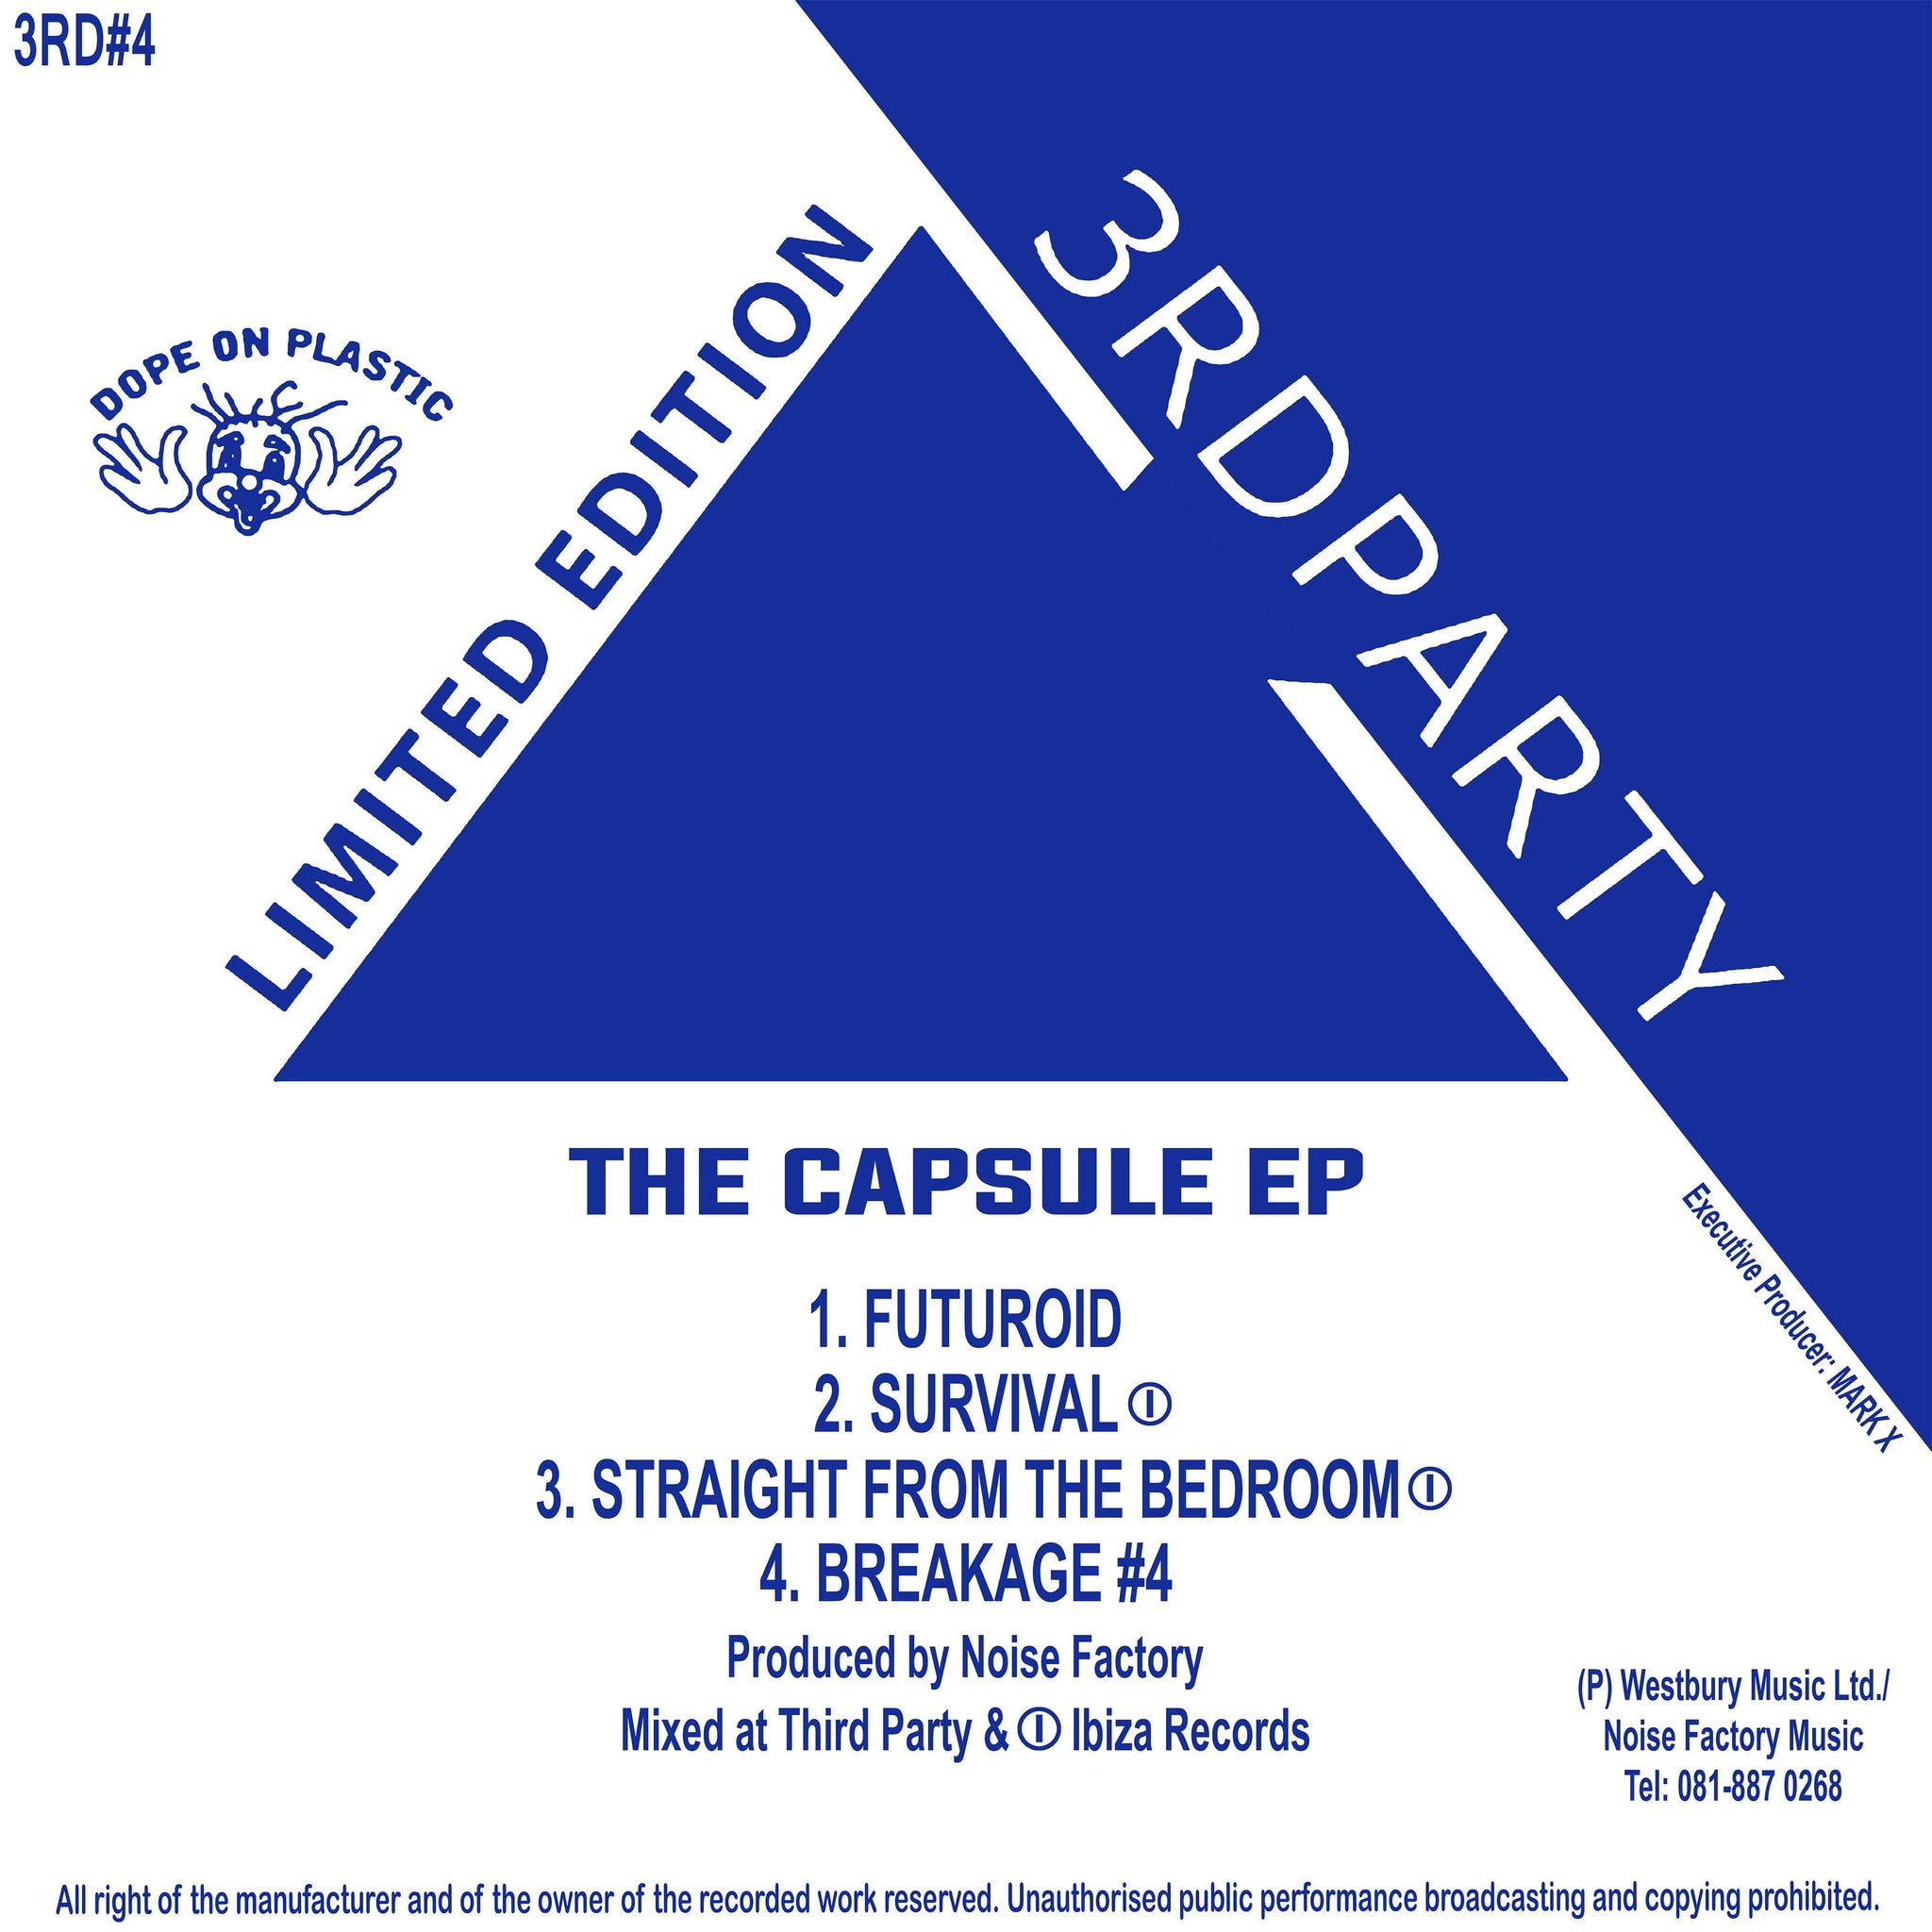 NOIZE FACTORY 'THE CAPSULE EP' 12" (REISSUE)